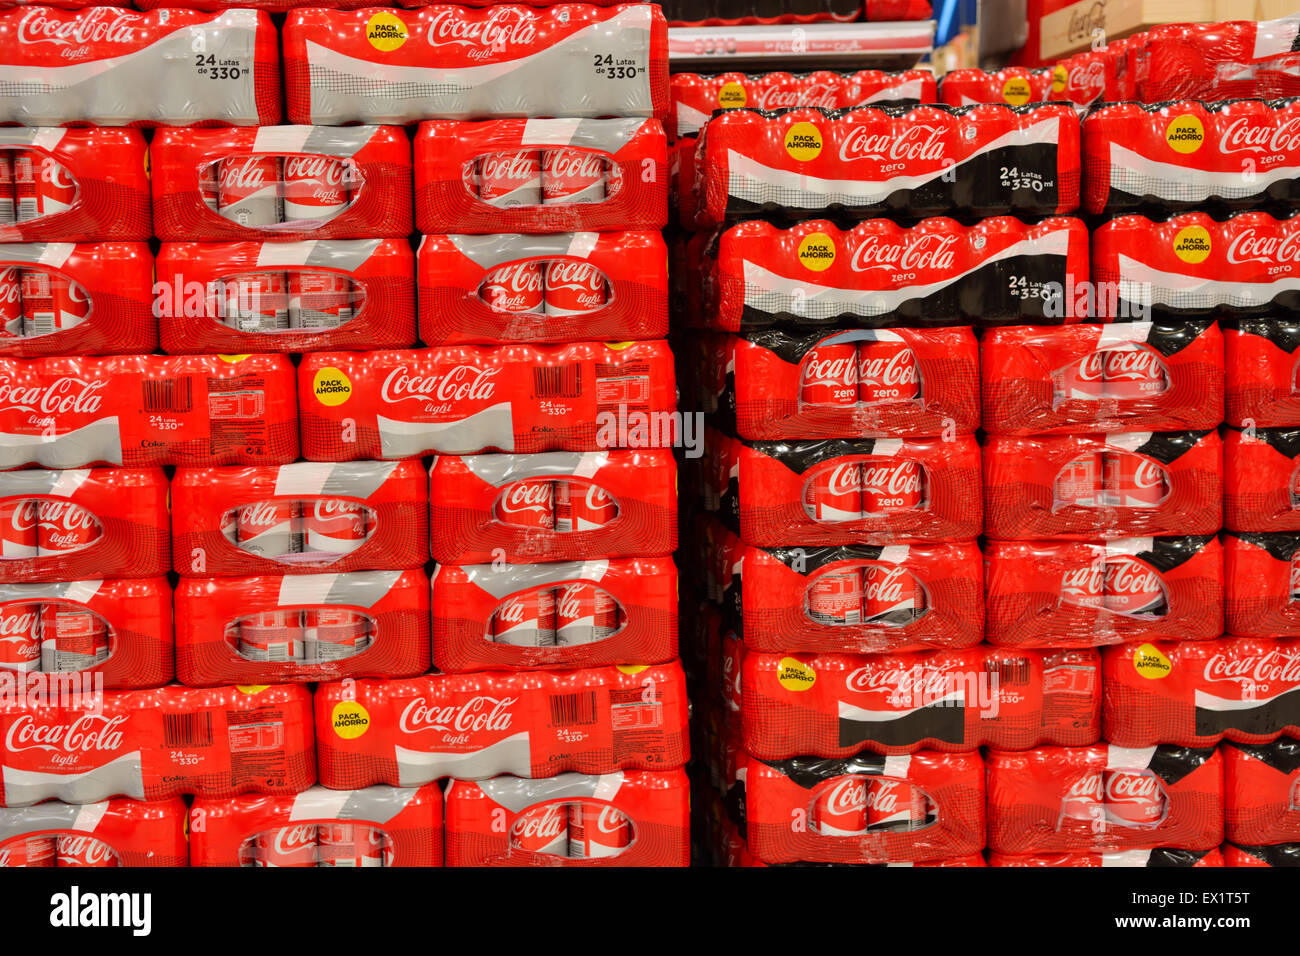 Stacks of cans of Coca Cola in supermarket Stock Photo